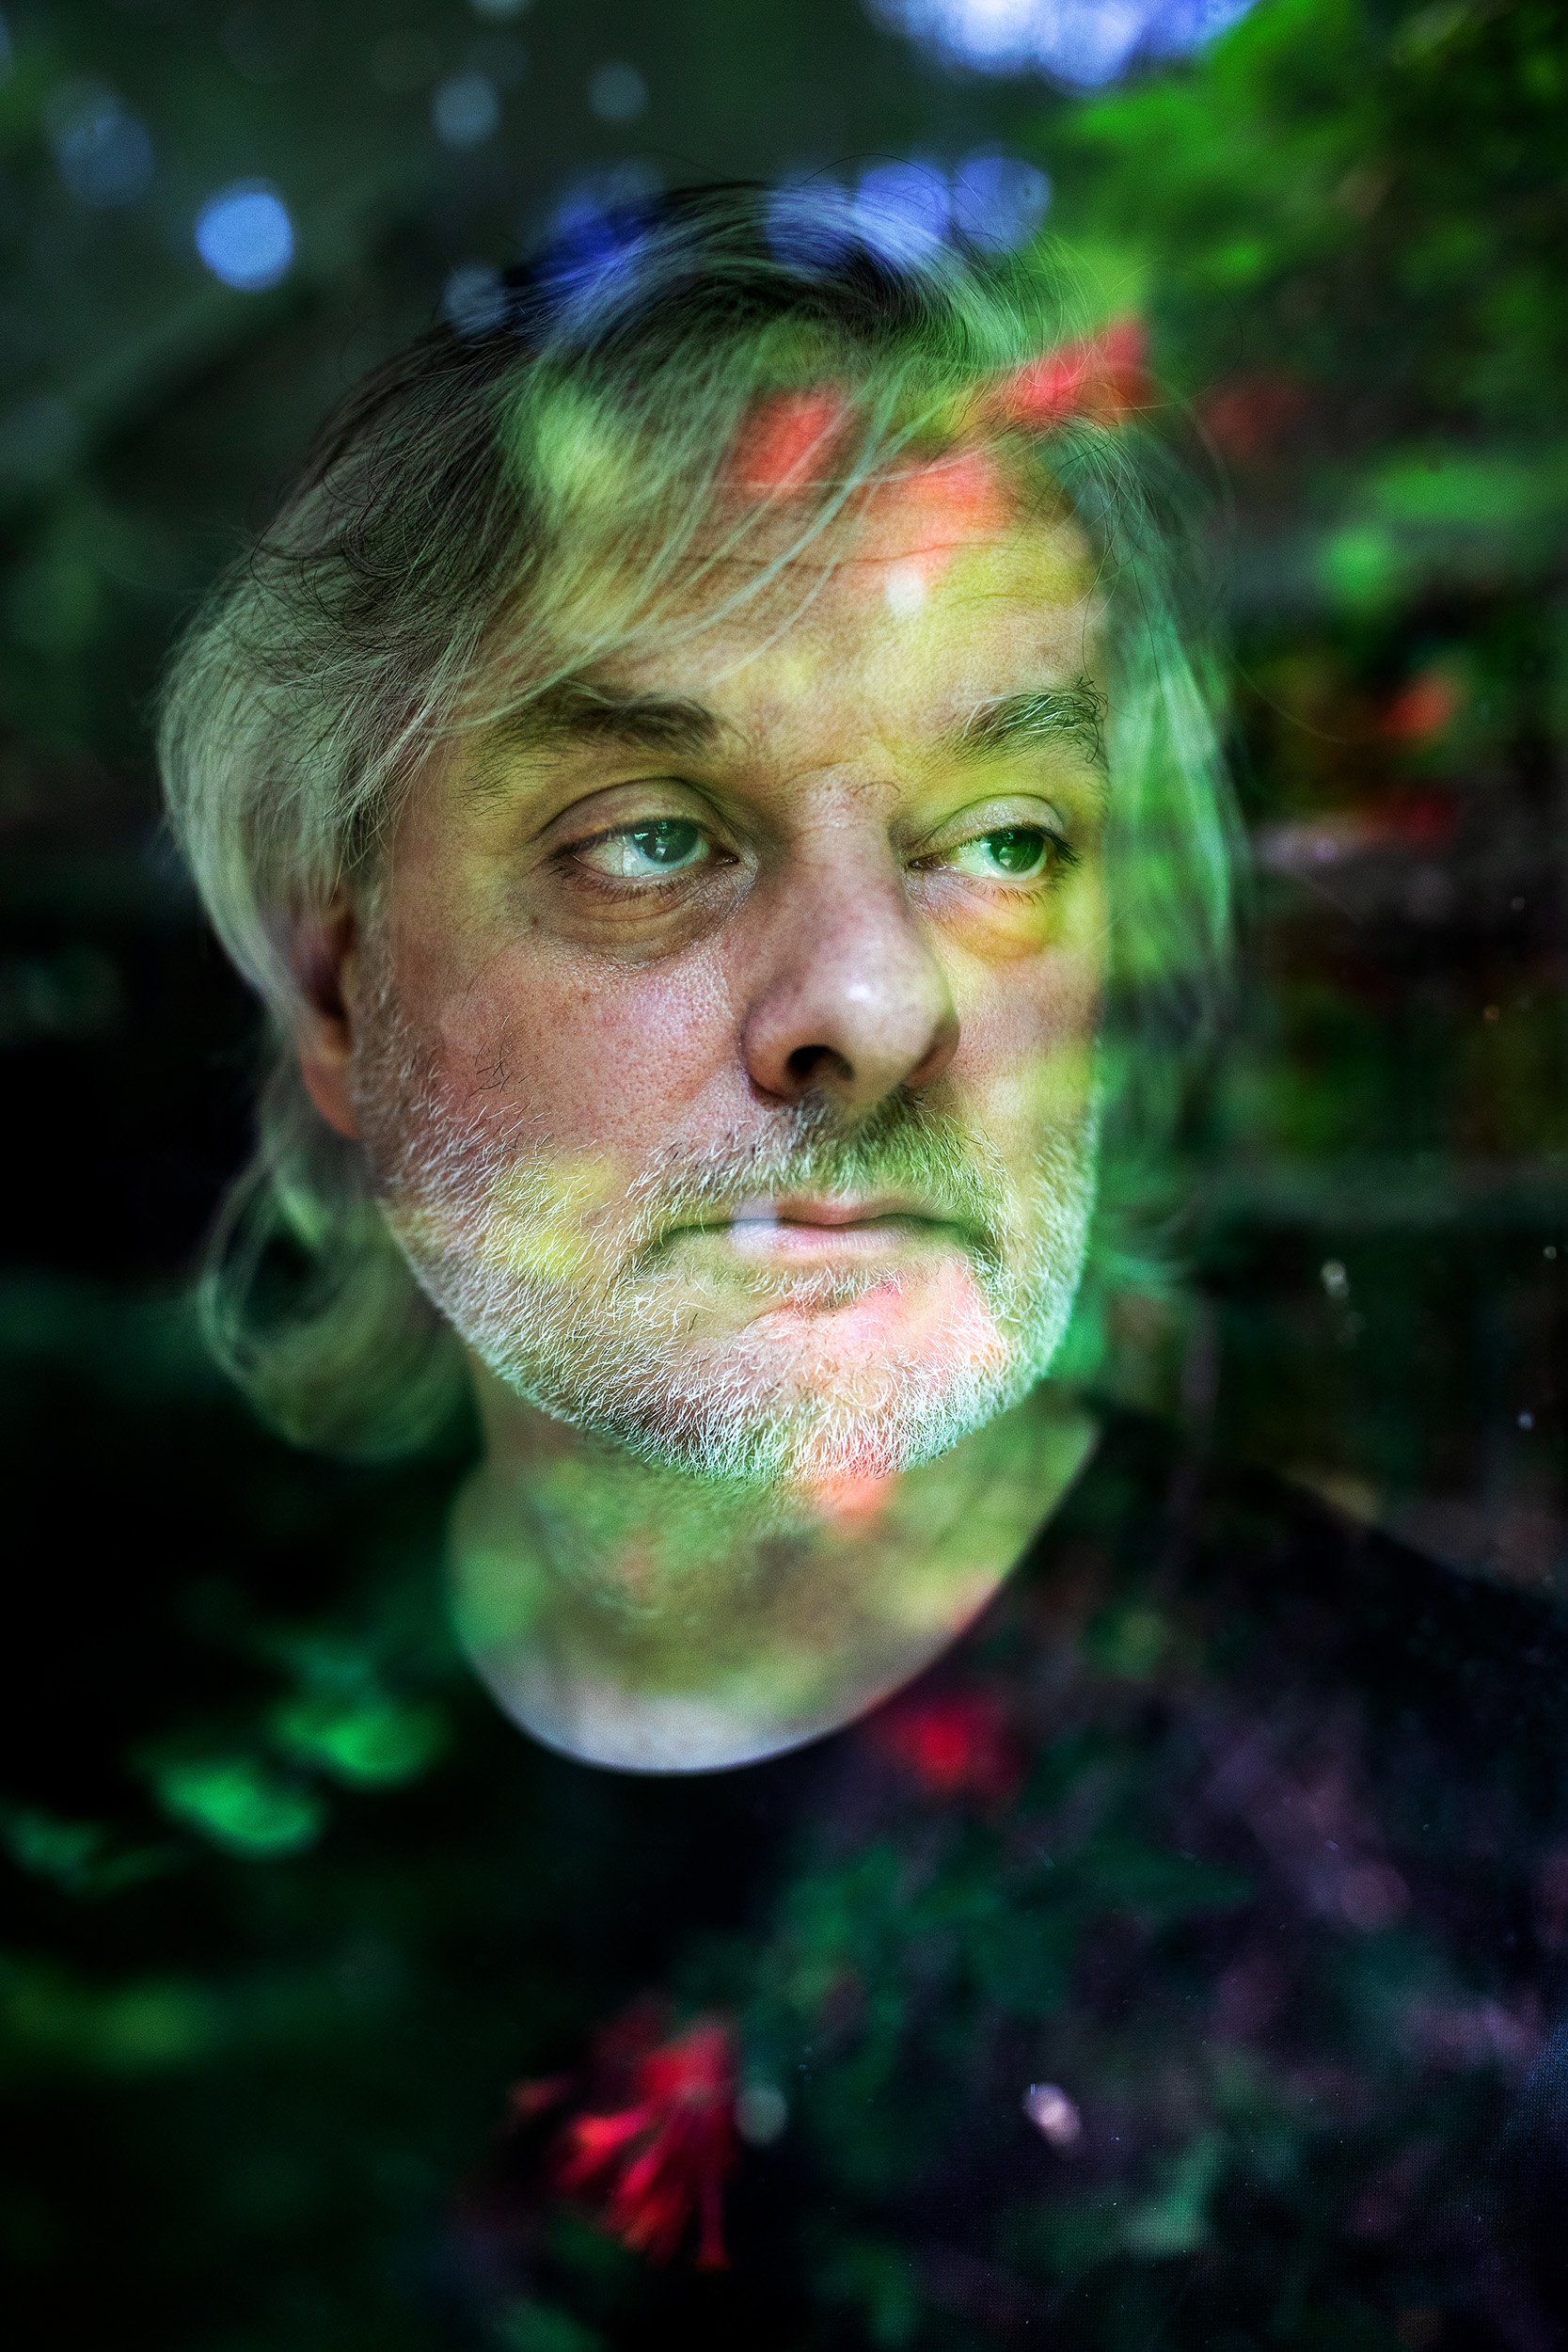  Philosopher, David Chalmers at his home in Yorktown Heights, New York. David Chalmers has established himself as a leading thinker on consciousness. He began his academic career in mathematics but slowly migrated toward cognitive psychology and phil